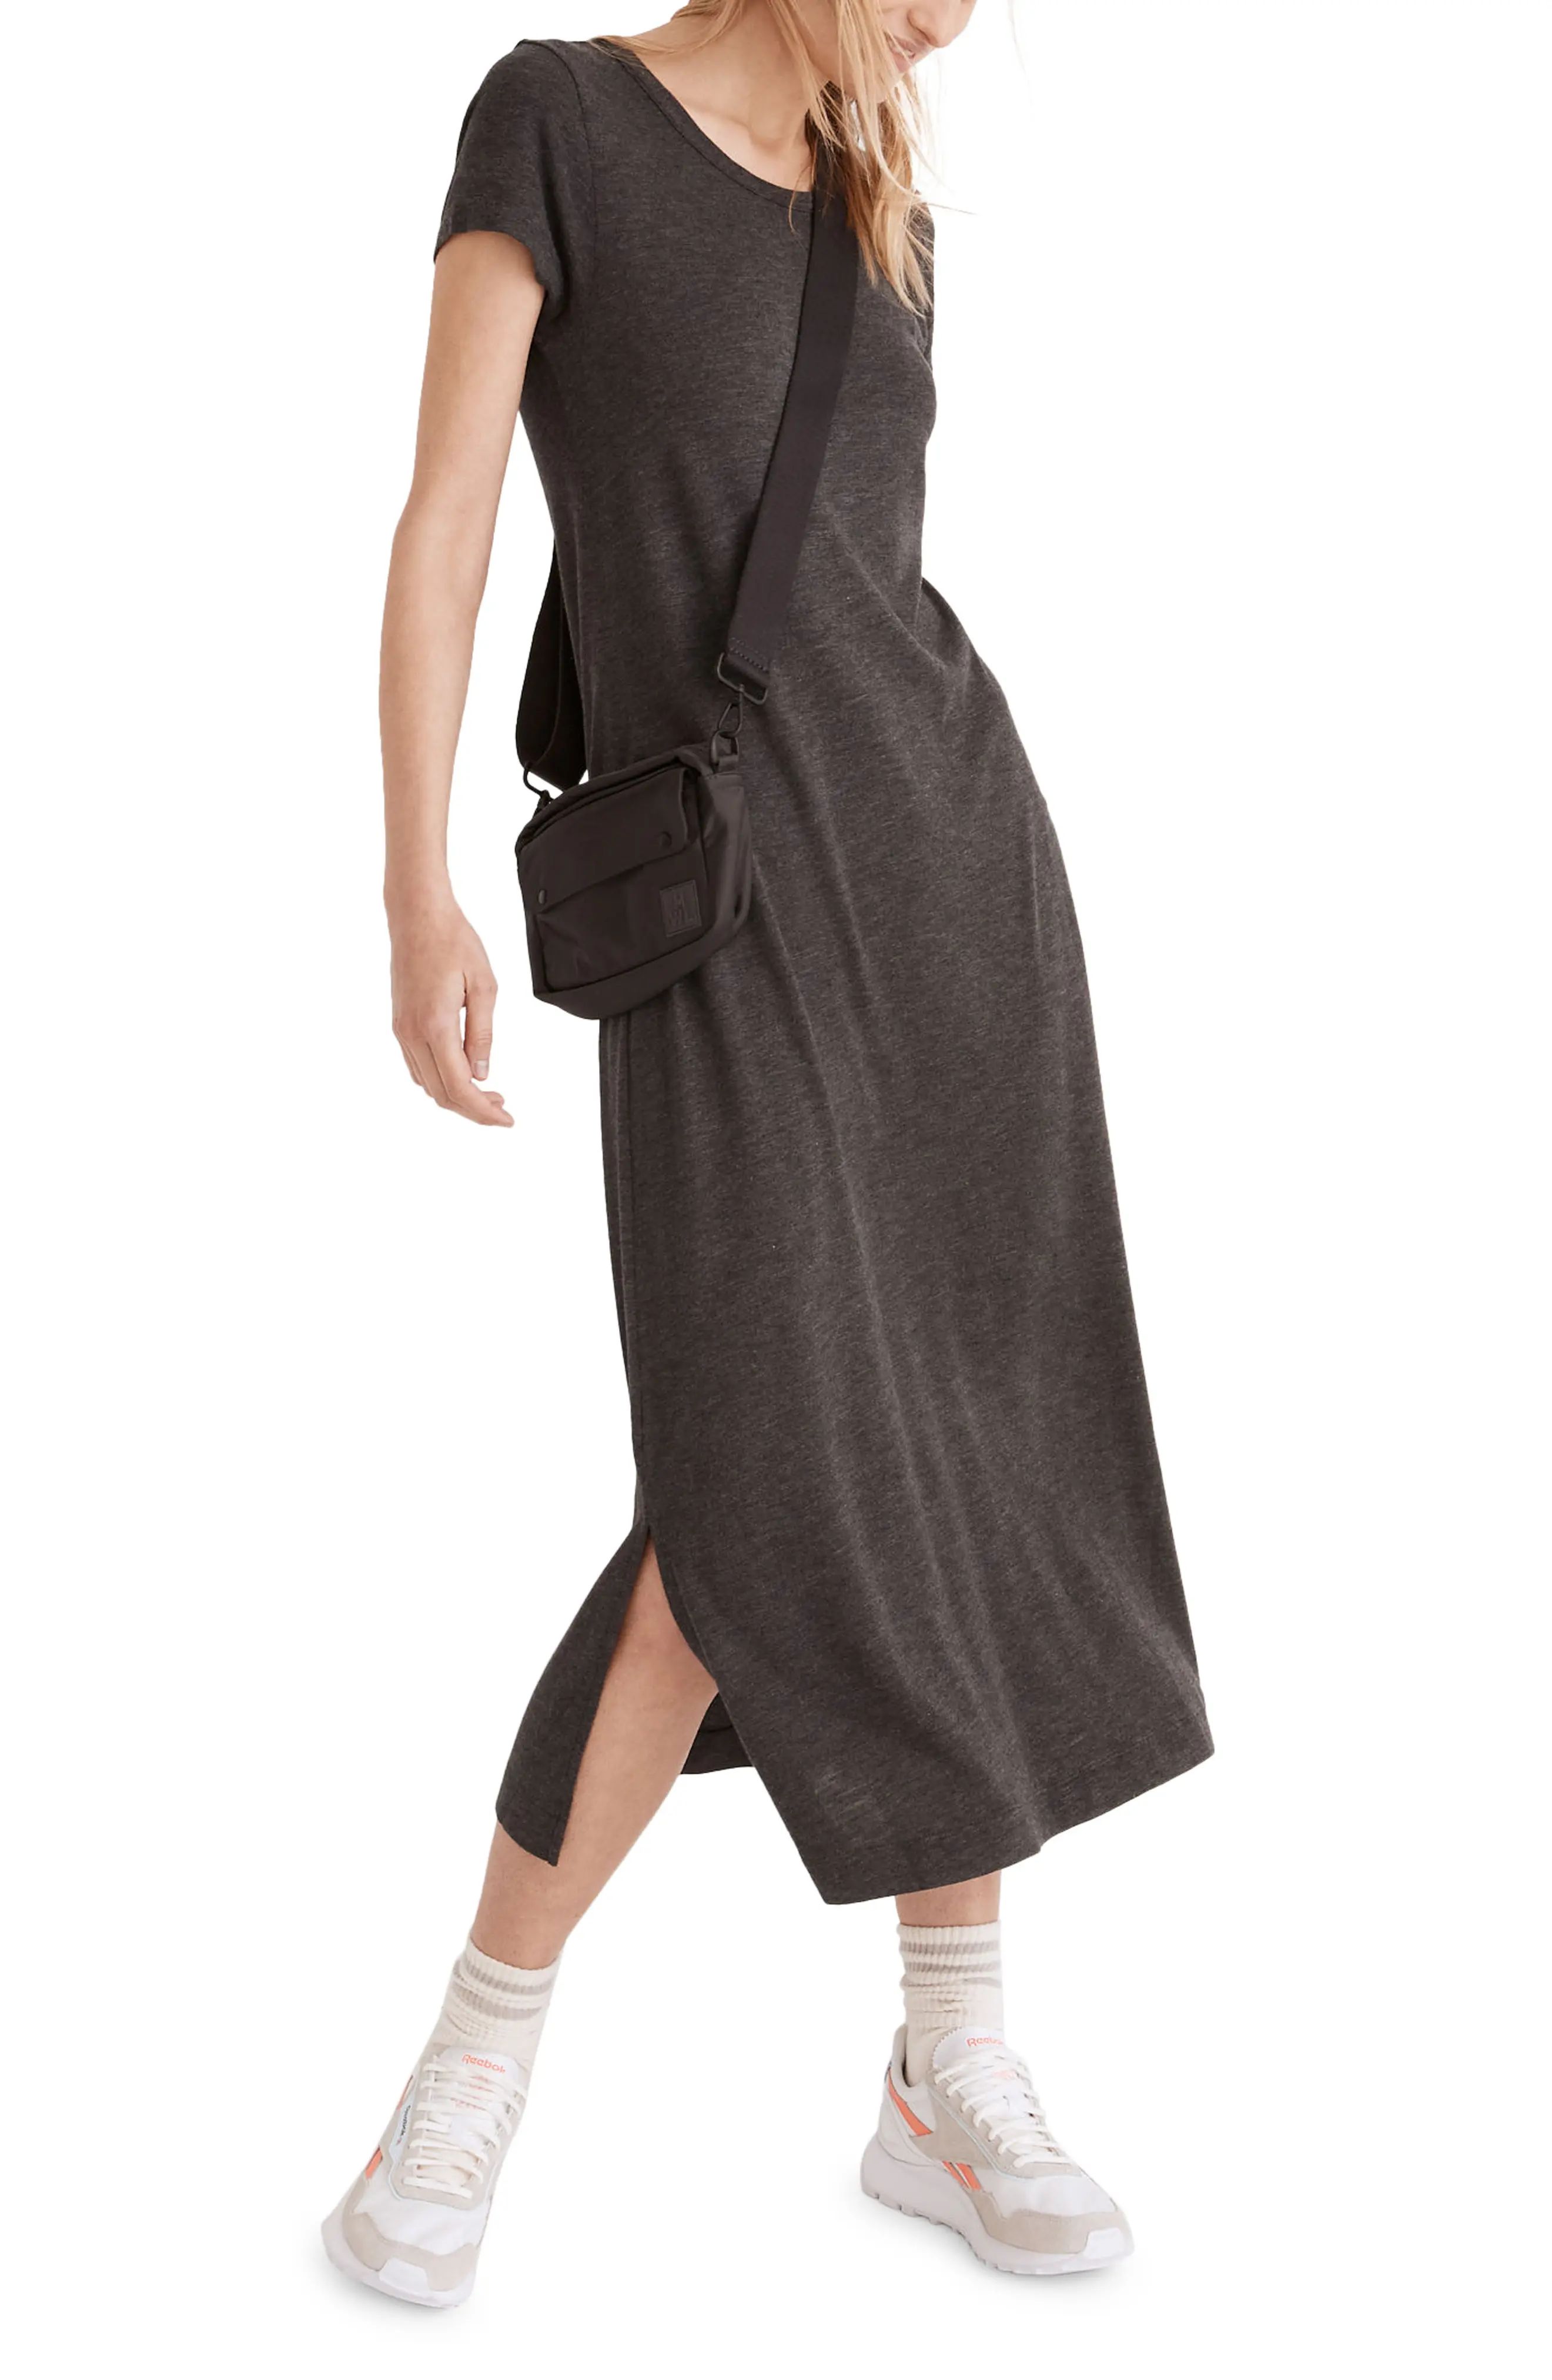 Madewell Relaxed Tee Dress in Heather Charcoal at Nordstrom, Size Small | Nordstrom